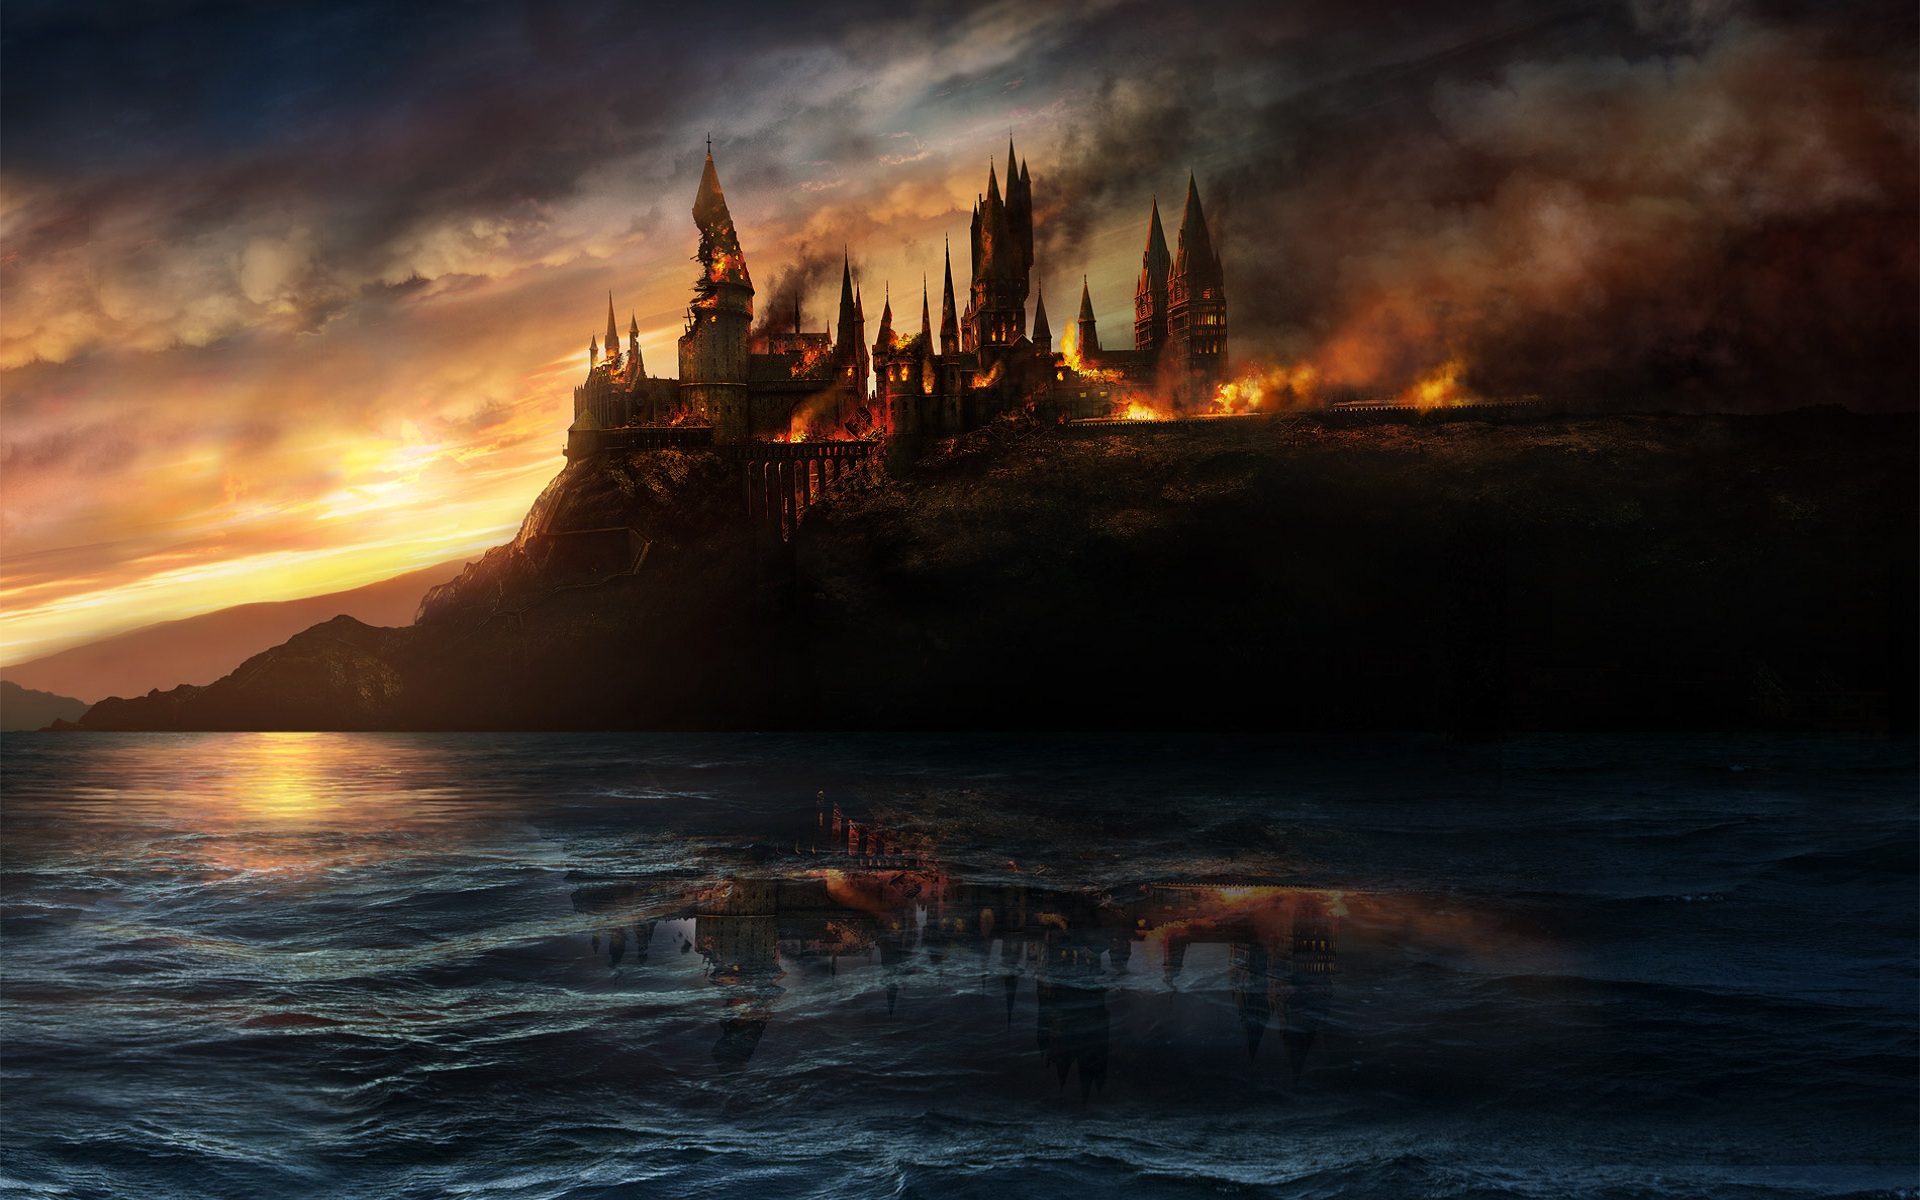 Hogwarts Castle engulfed in flames and smoke, creating a fiery and dramatic scene.